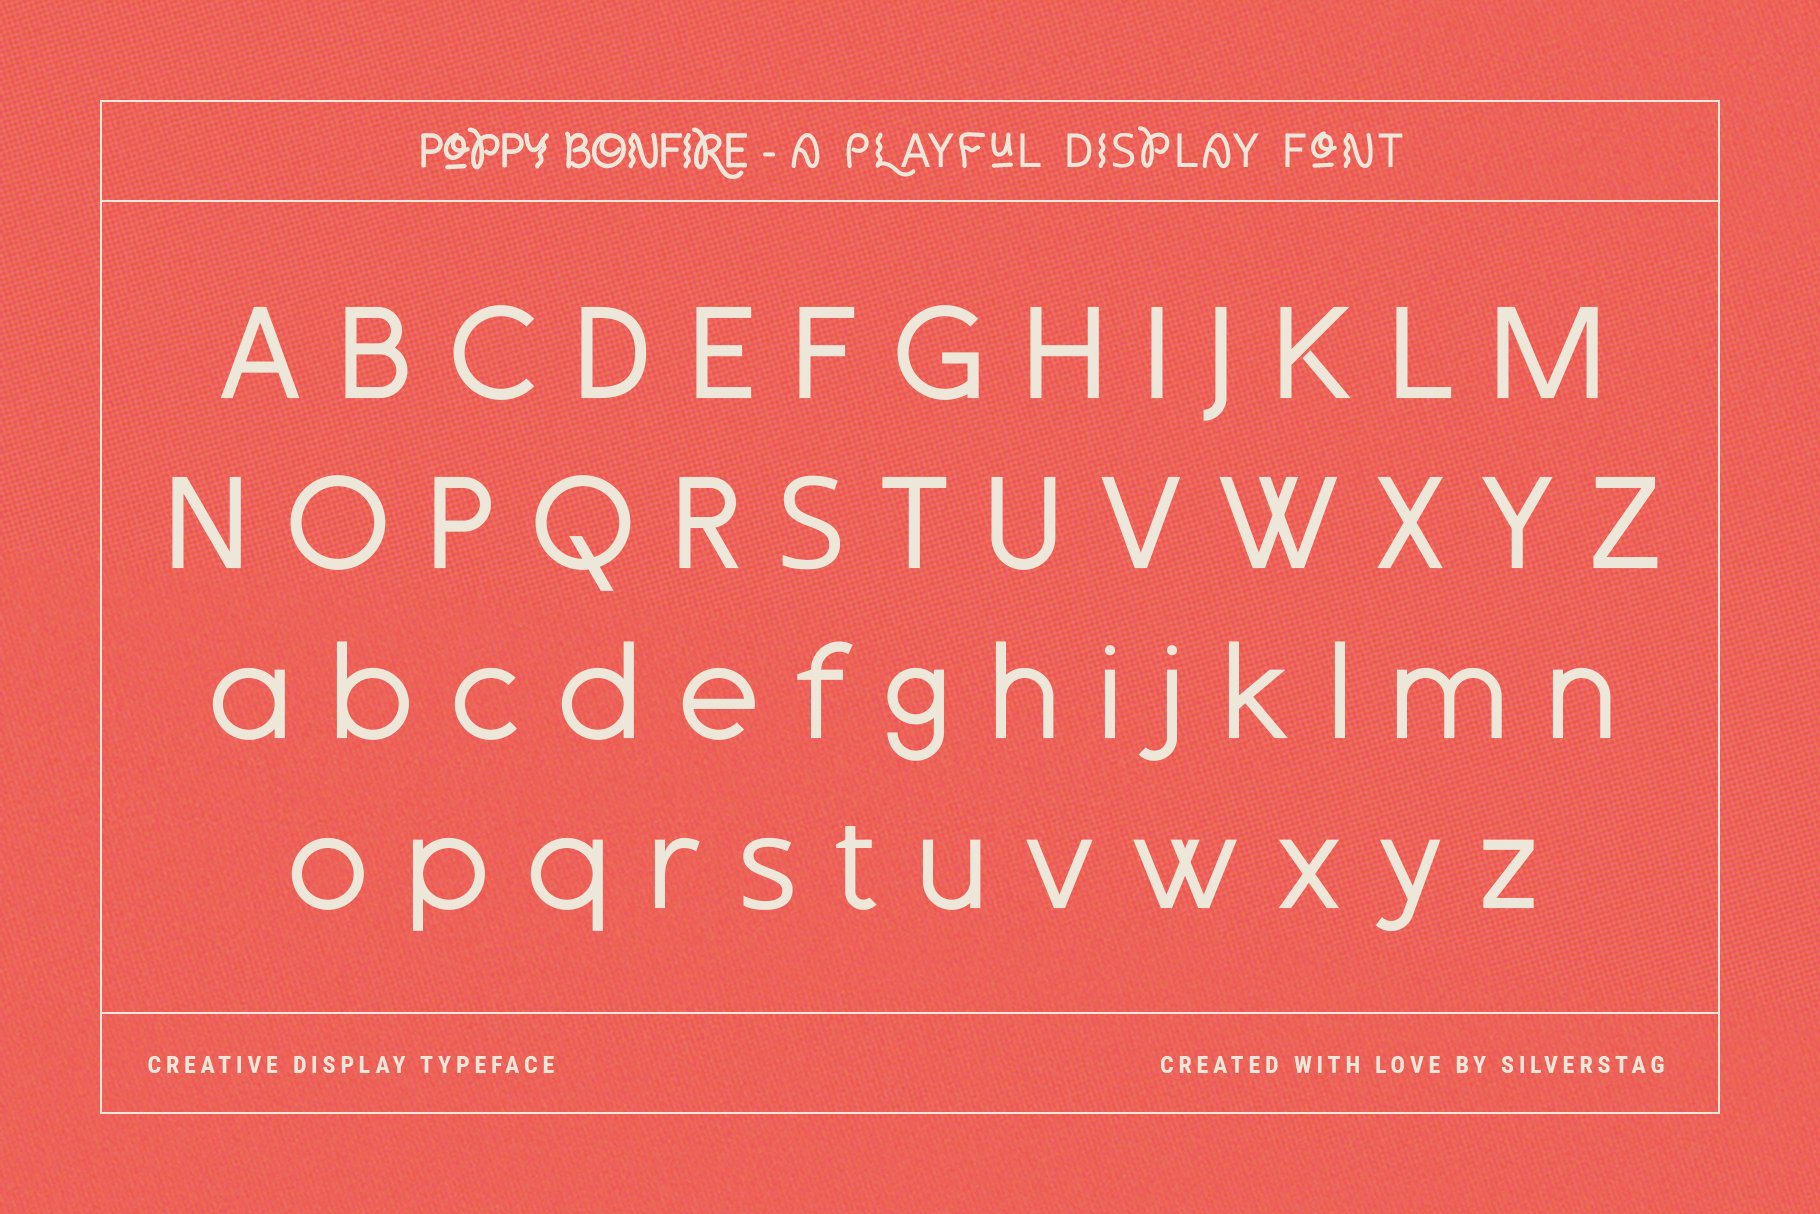 12 poppy bonfire playful display font by silverstag 889